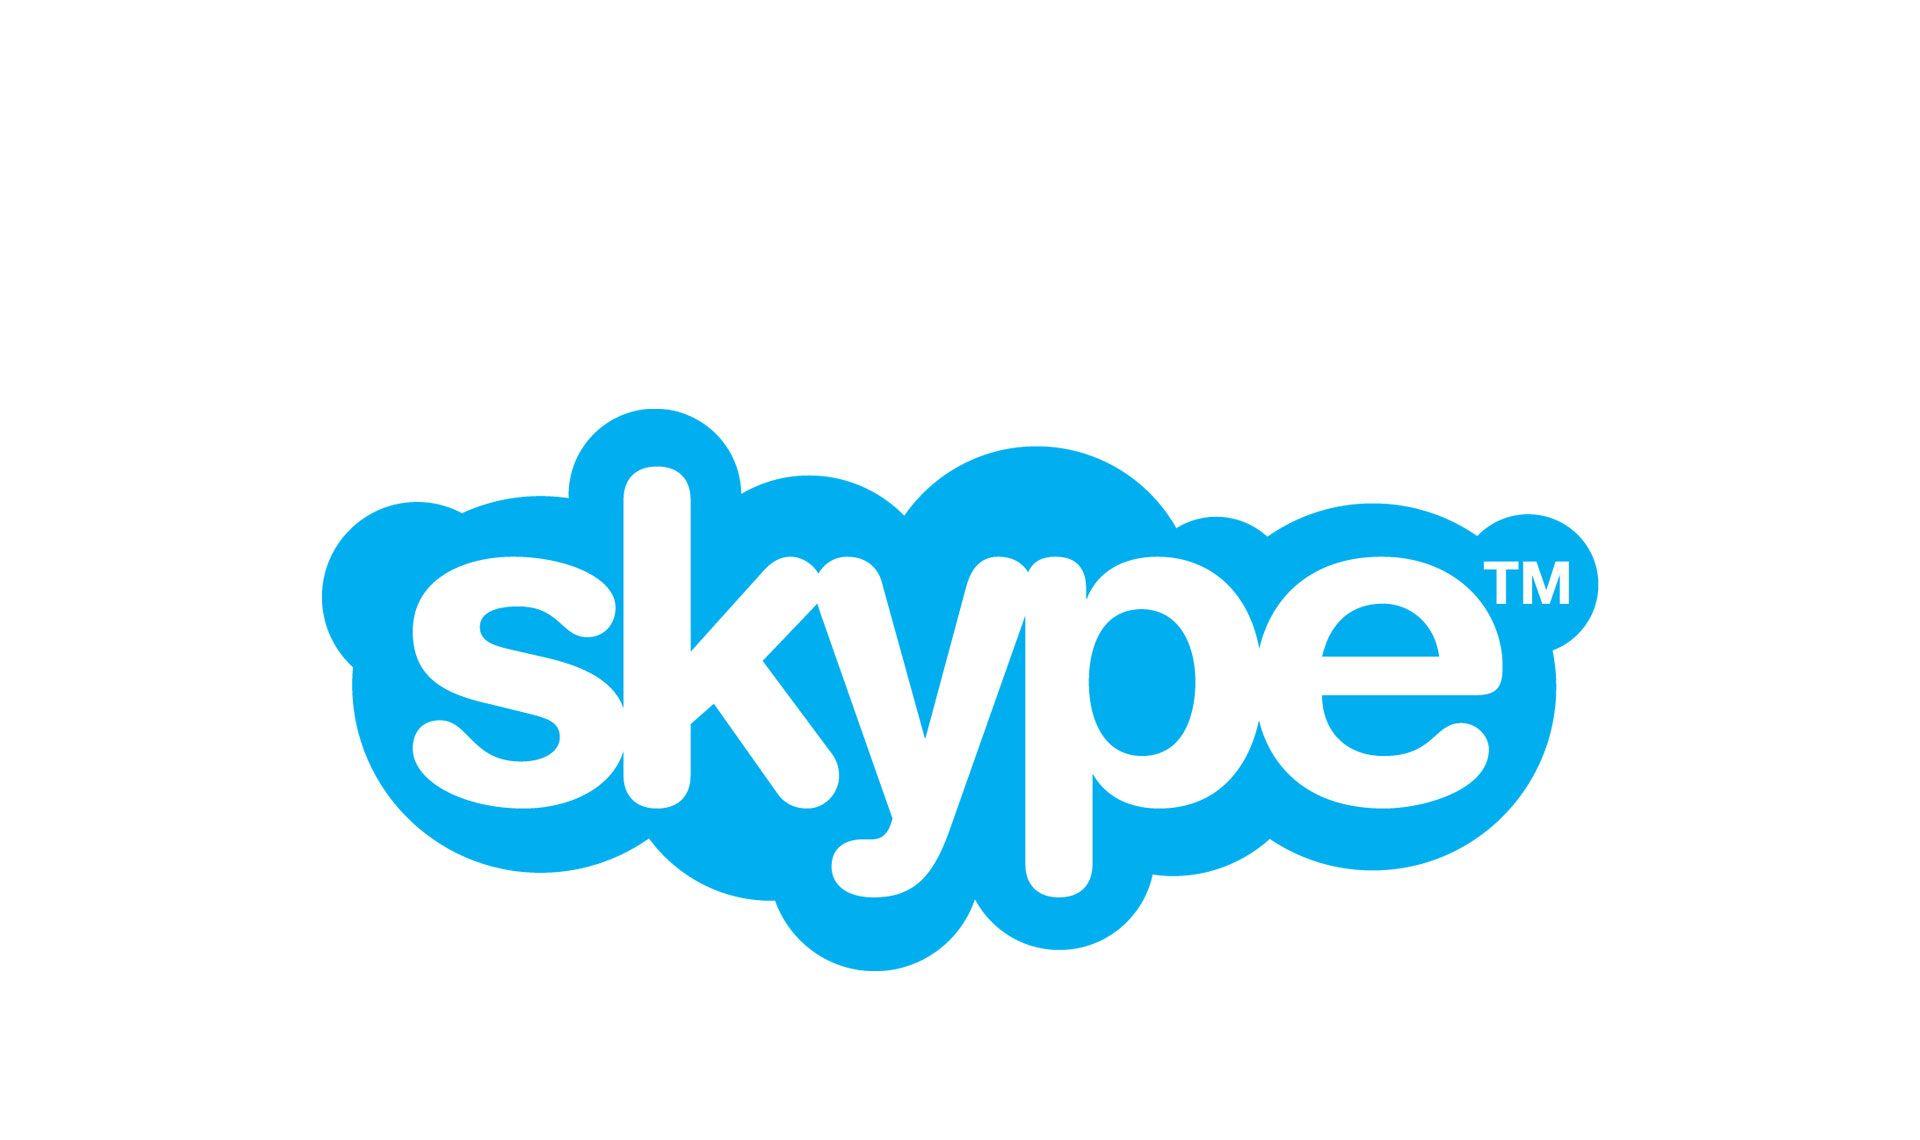 What is Skype? How can you use it to build your business